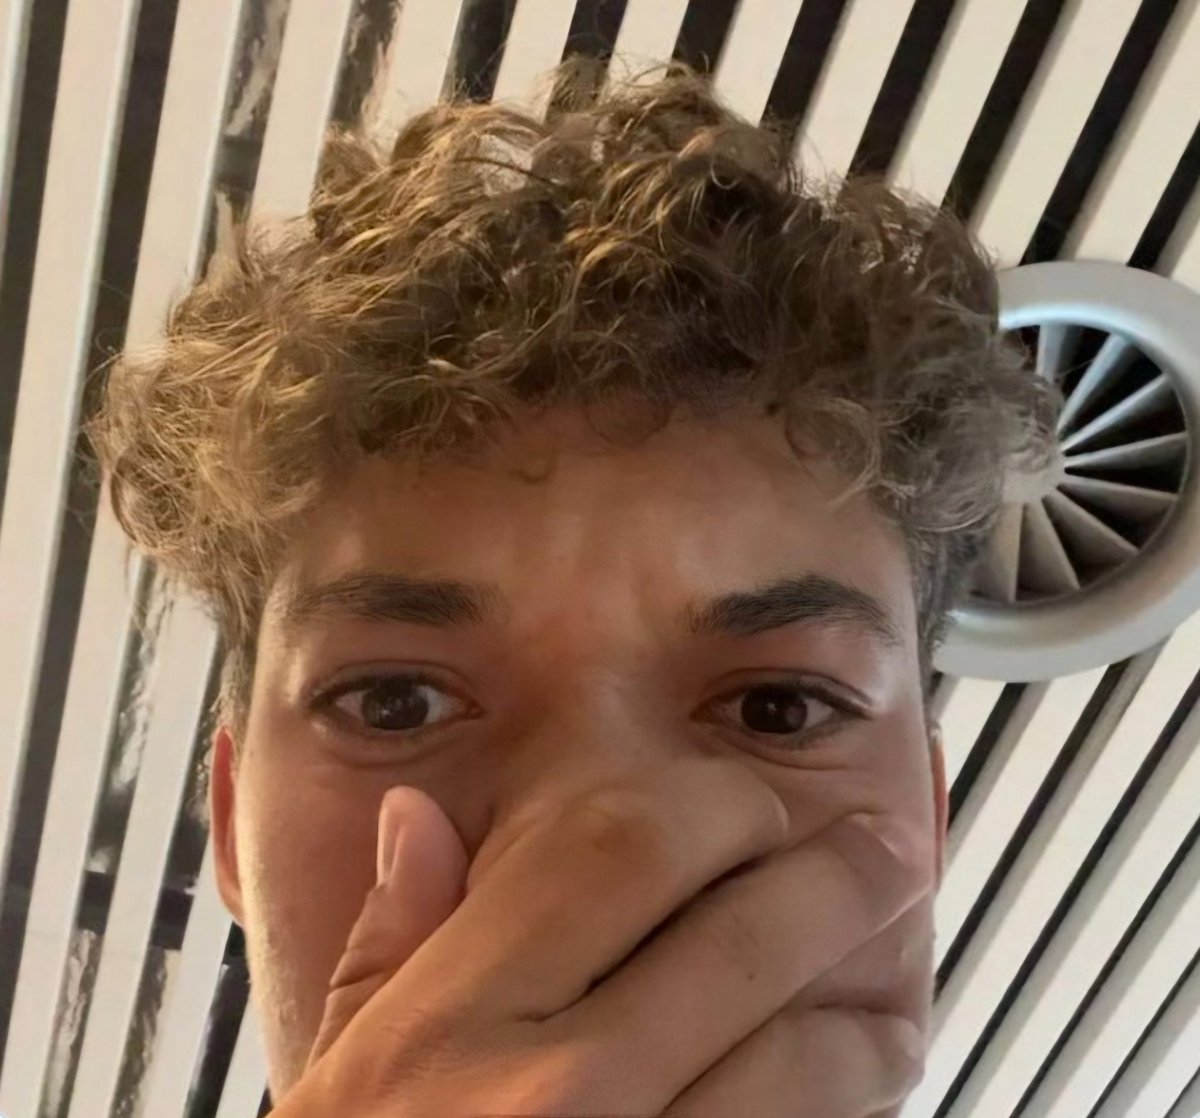 16 year old American Darwin Blanch who has a wild card into the Madrid masters had this reaction when told he was play @RafaelNadal first round. As he put it 'guys I play Nadal, wtf?'